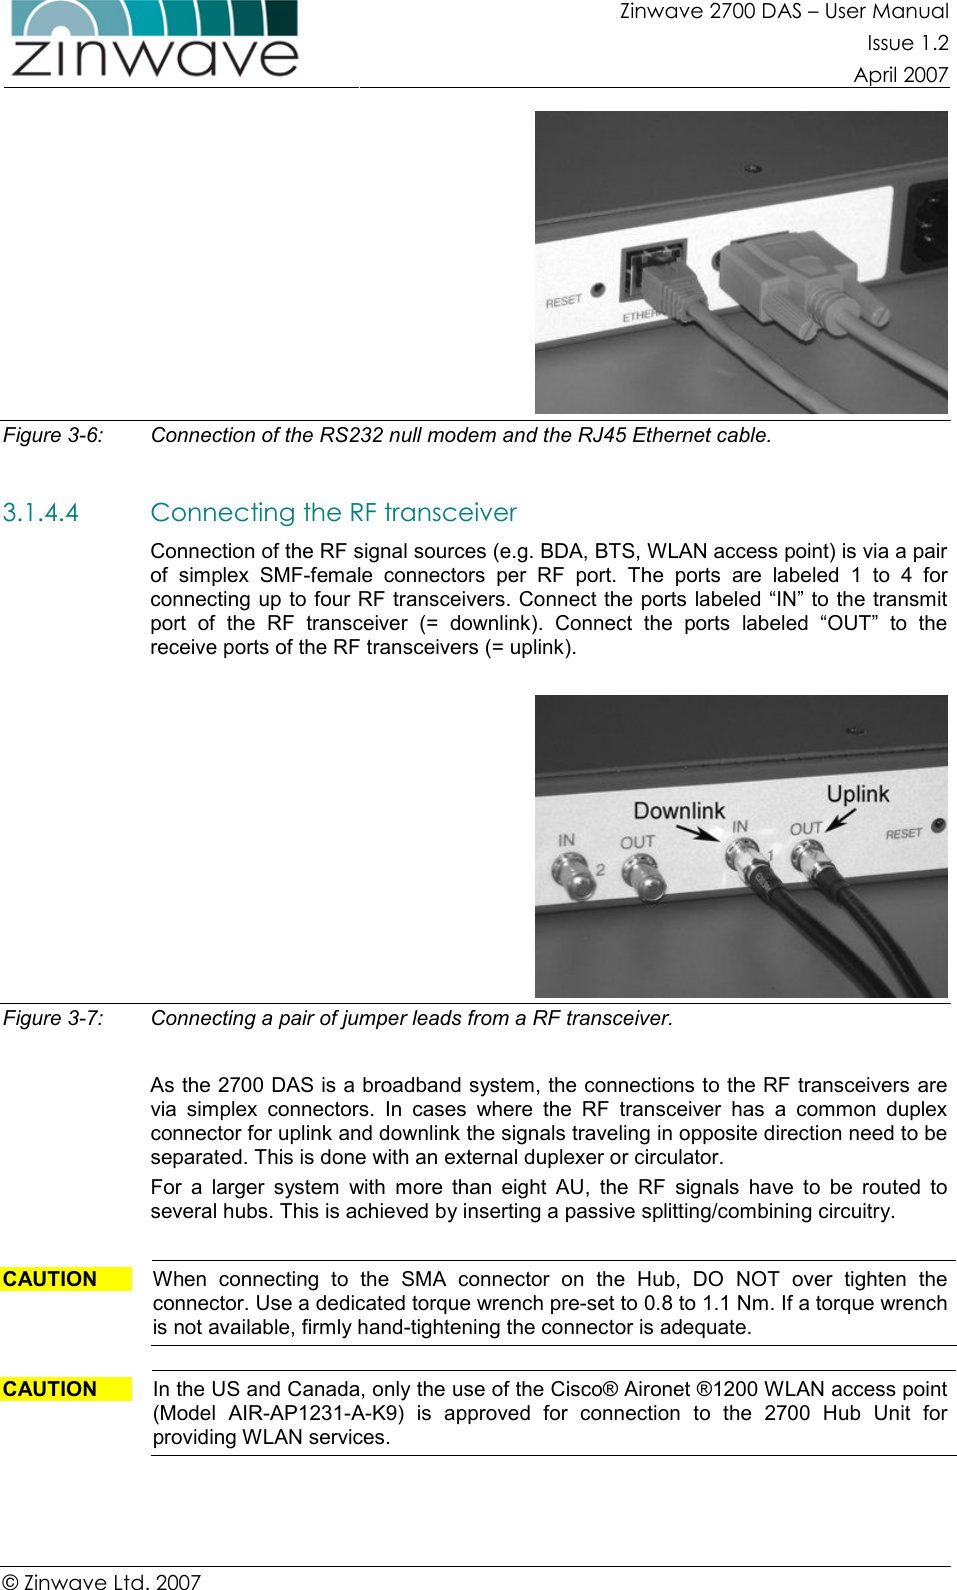 Zinwave 2700 DAS – User Manual Issue 1.2  April 2007  © Zinwave Ltd. 2007   Figure 3-6:  Connection of the RS232 null modem and the RJ45 Ethernet cable.  3.1.4.4 Connecting the RF transceiver   Connection of the RF signal sources (e.g. BDA, BTS, WLAN access point) is via a pair of  simplex  SMF-female  connectors  per  RF  port.  The  ports  are  labeled  1  to  4  for connecting up to four RF transceivers. Connect the ports labeled “IN” to the transmit port  of  the  RF  transceiver  (=  downlink).  Connect  the  ports  labeled  “OUT”  to  the receive ports of the RF transceivers (= uplink).    Figure 3-7:  Connecting a pair of jumper leads from a RF transceiver.  As the 2700 DAS is a broadband system, the connections to the RF transceivers are via  simplex  connectors.  In  cases  where  the  RF  transceiver  has  a  common  duplex connector for uplink and downlink the signals traveling in opposite direction need to be separated. This is done with an external duplexer or circulator.  For  a  larger  system  with  more  than  eight  AU,  the  RF  signals  have  to  be  routed  to several hubs. This is achieved by inserting a passive splitting/combining circuitry.   CAUTION  When  connecting  to  the  SMA  connector  on  the  Hub,  DO  NOT  over  tighten  the connector. Use a dedicated torque wrench pre-set to 0.8 to 1.1 Nm. If a torque wrench is not available, firmly hand-tightening the connector is adequate.  CAUTION  In the US and Canada, only the use of the Cisco® Aironet ®1200 WLAN access point (Model  AIR-AP1231-A-K9)  is  approved  for  connection  to  the  2700  Hub  Unit  for providing WLAN services.    